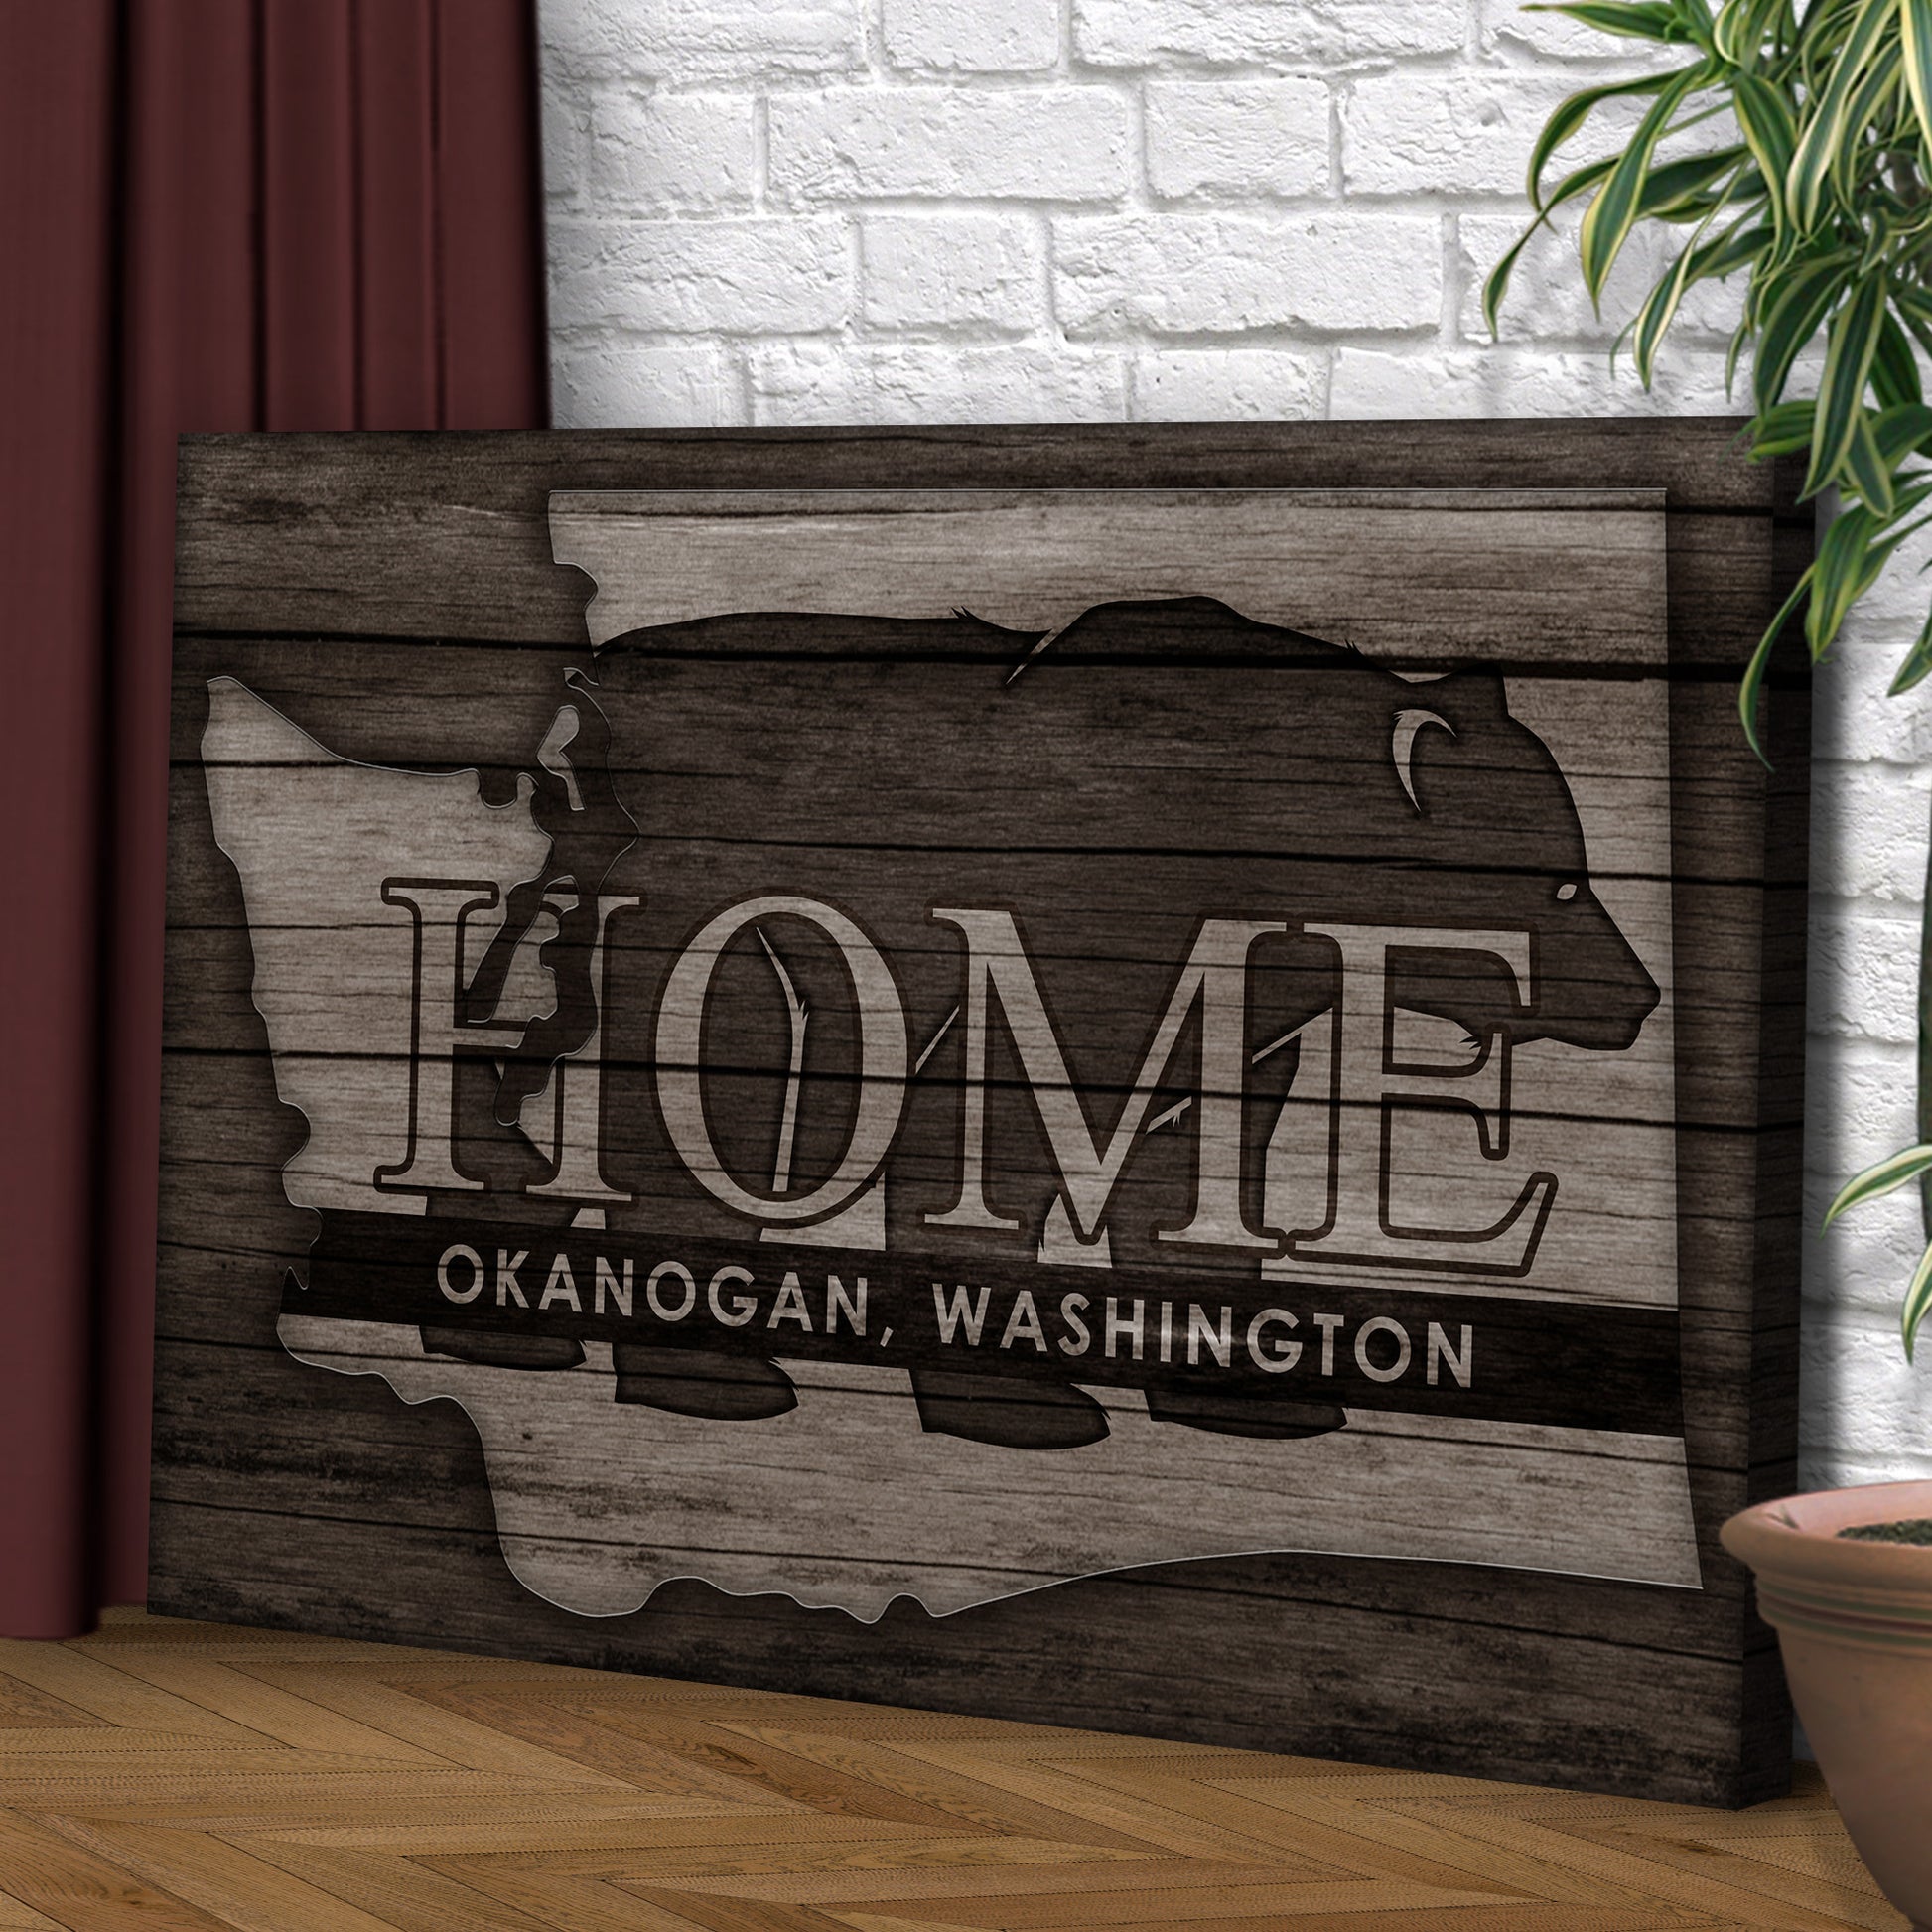 Bear Home Map Sign - Image by Tailored Canvases